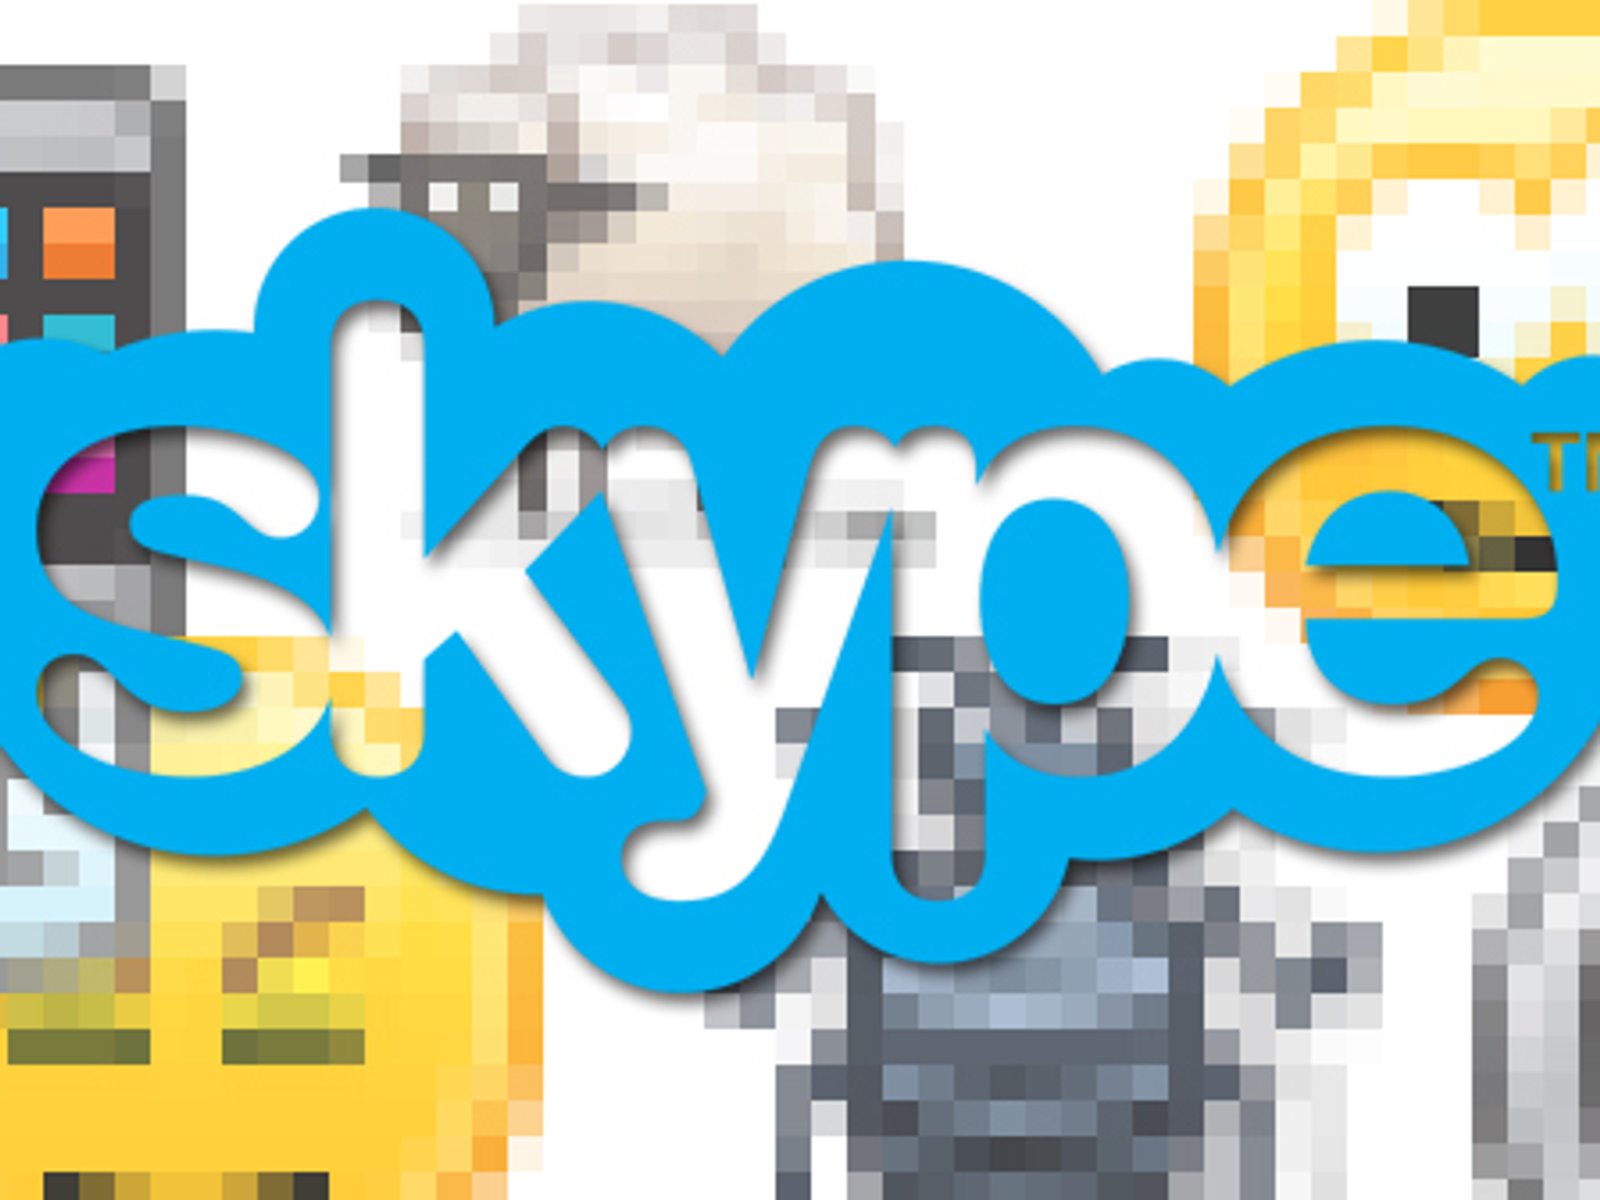 cool icons for skype